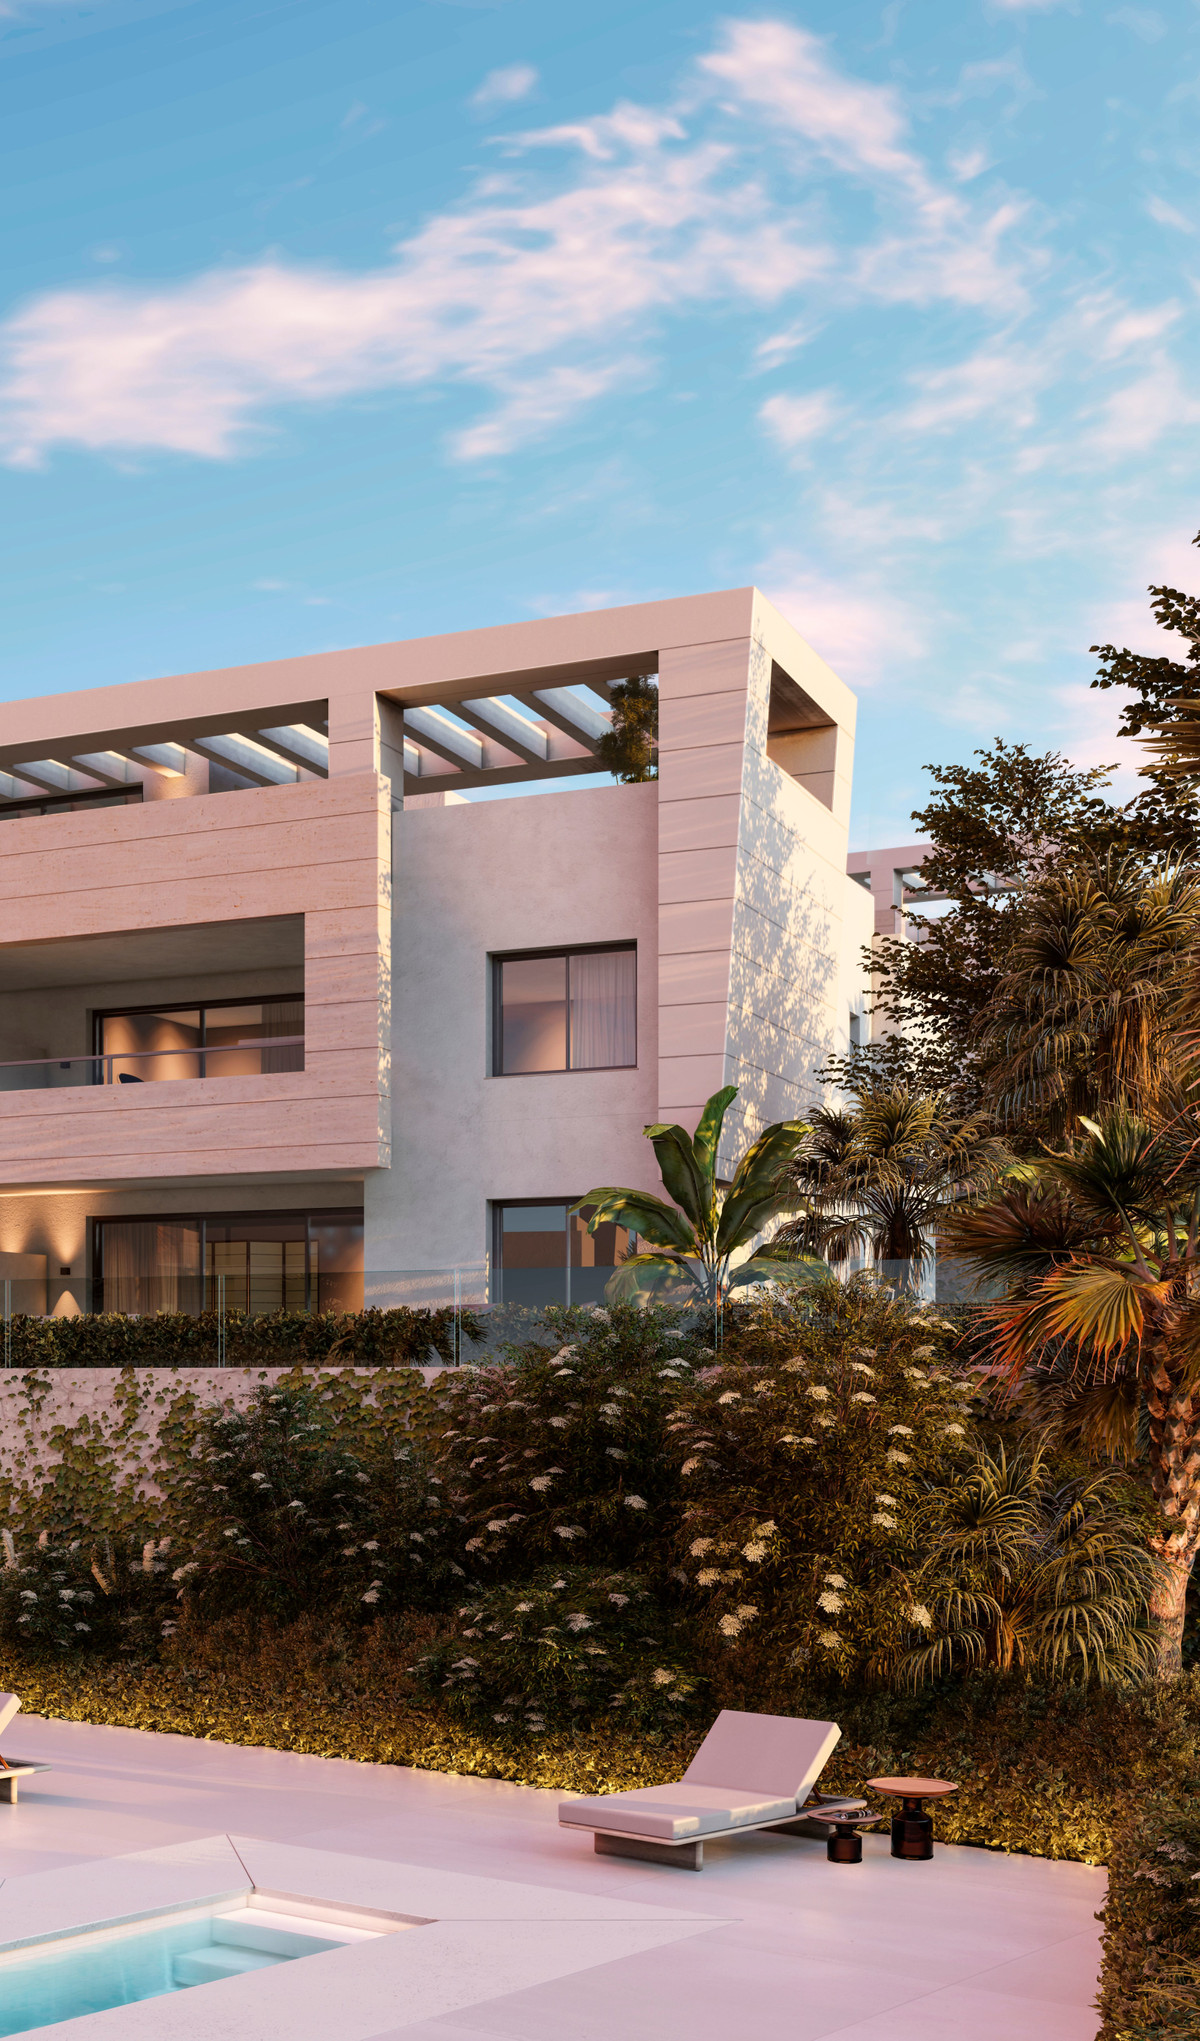 New Development: Prices from € 260,500 to € 449,900. [Beds: 2 - 2] [Baths: 2 - 3] [Built size: 83.00 m2 - 107.00 m2]